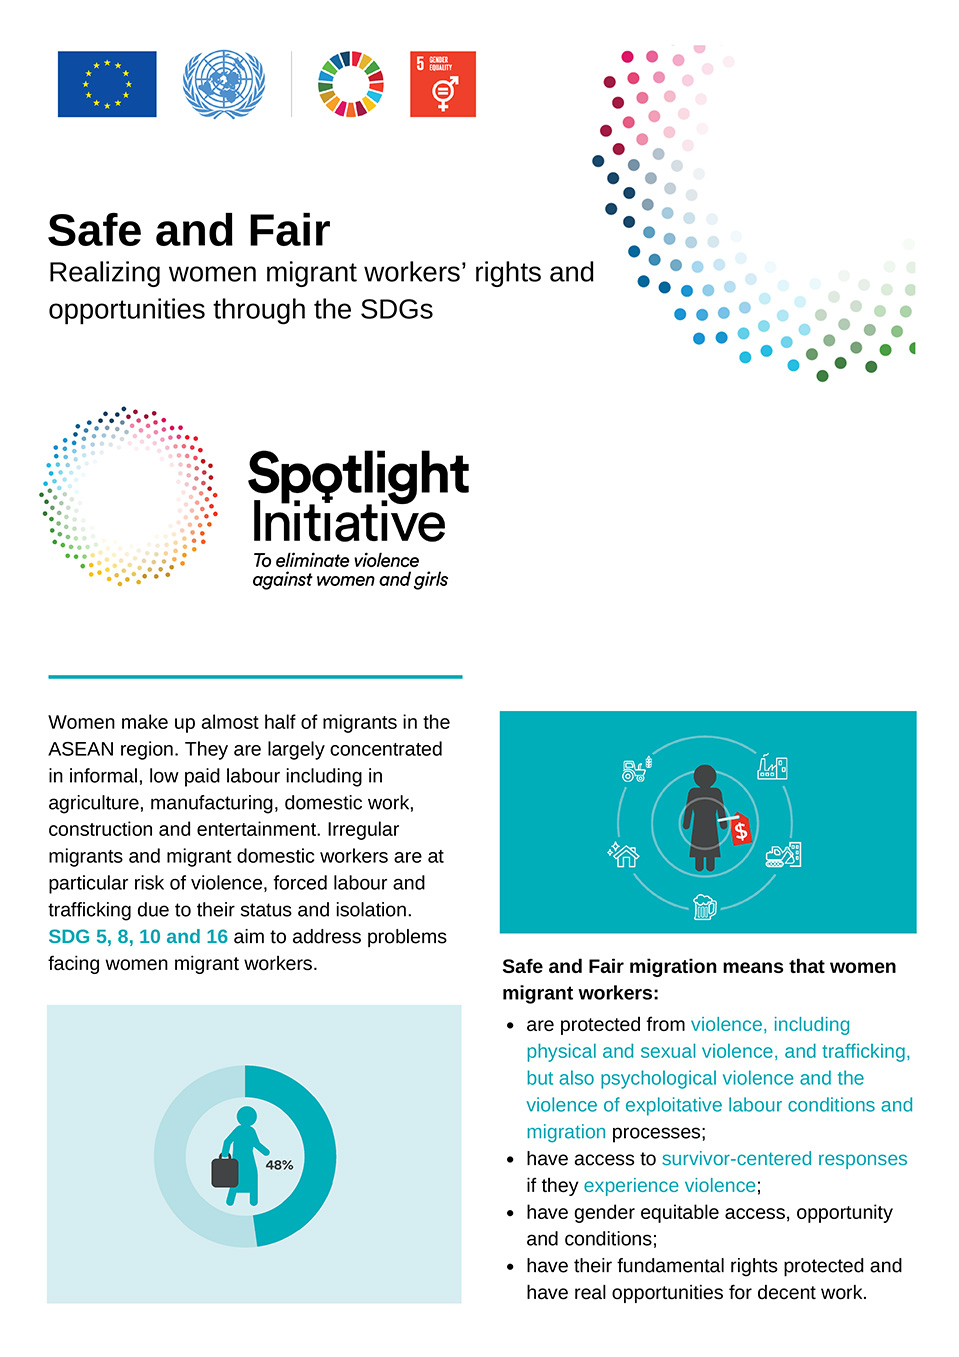 Safe and Fair: Realizing women migrant workers' rights and opportunities through the SDGs